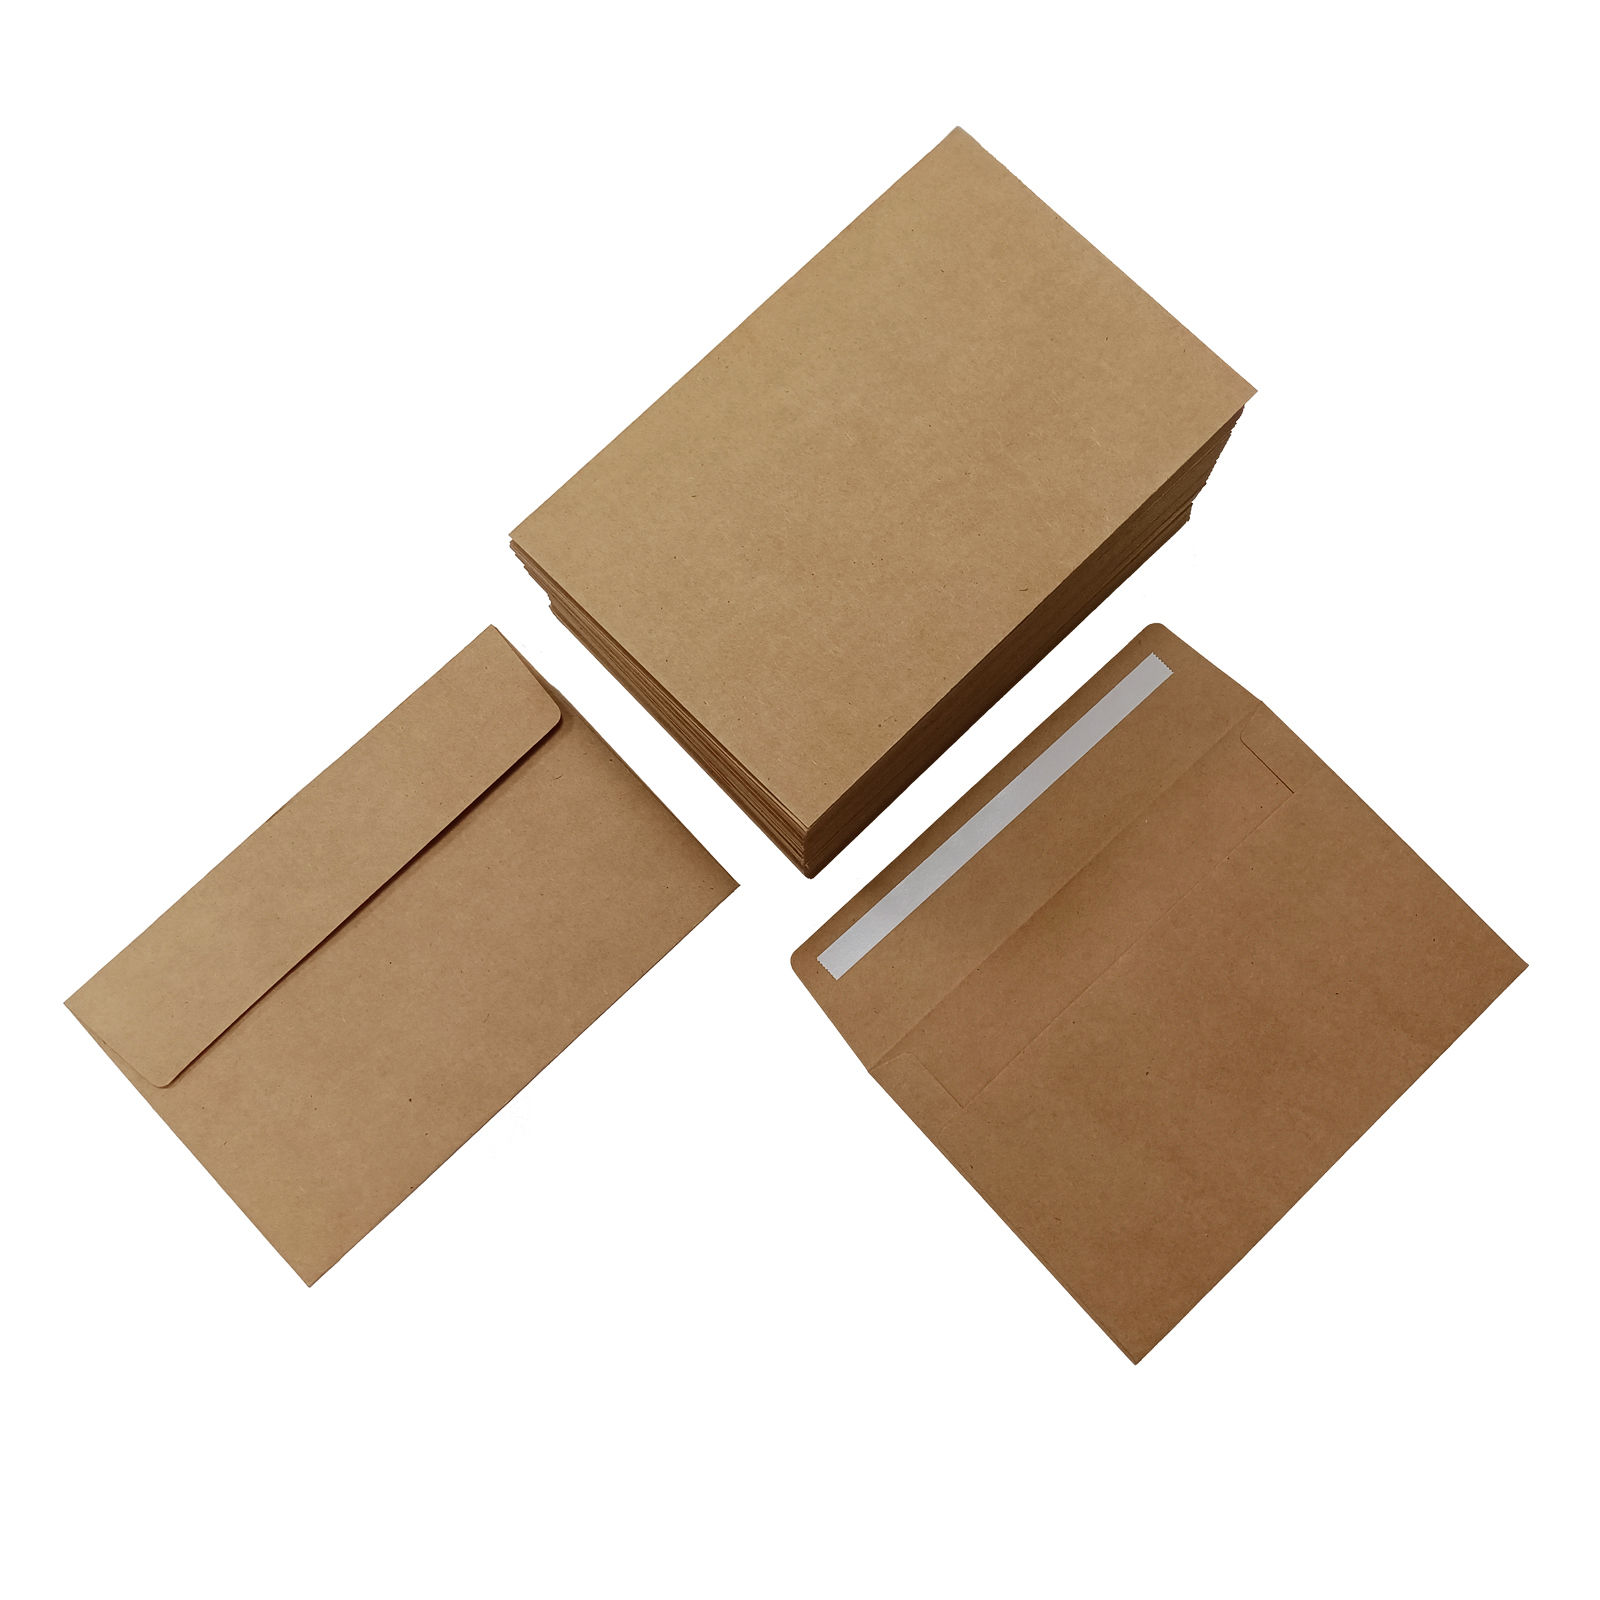 Stationery Weddings 120GSM Brown Kraft Paper Envelopes Self Seal 5.25 x 7.25 Inches Offce ValBox 100 Qty A7 Invitation Envelopes 5 x 7 Baby Shower for 5x7 Cards Invitations 